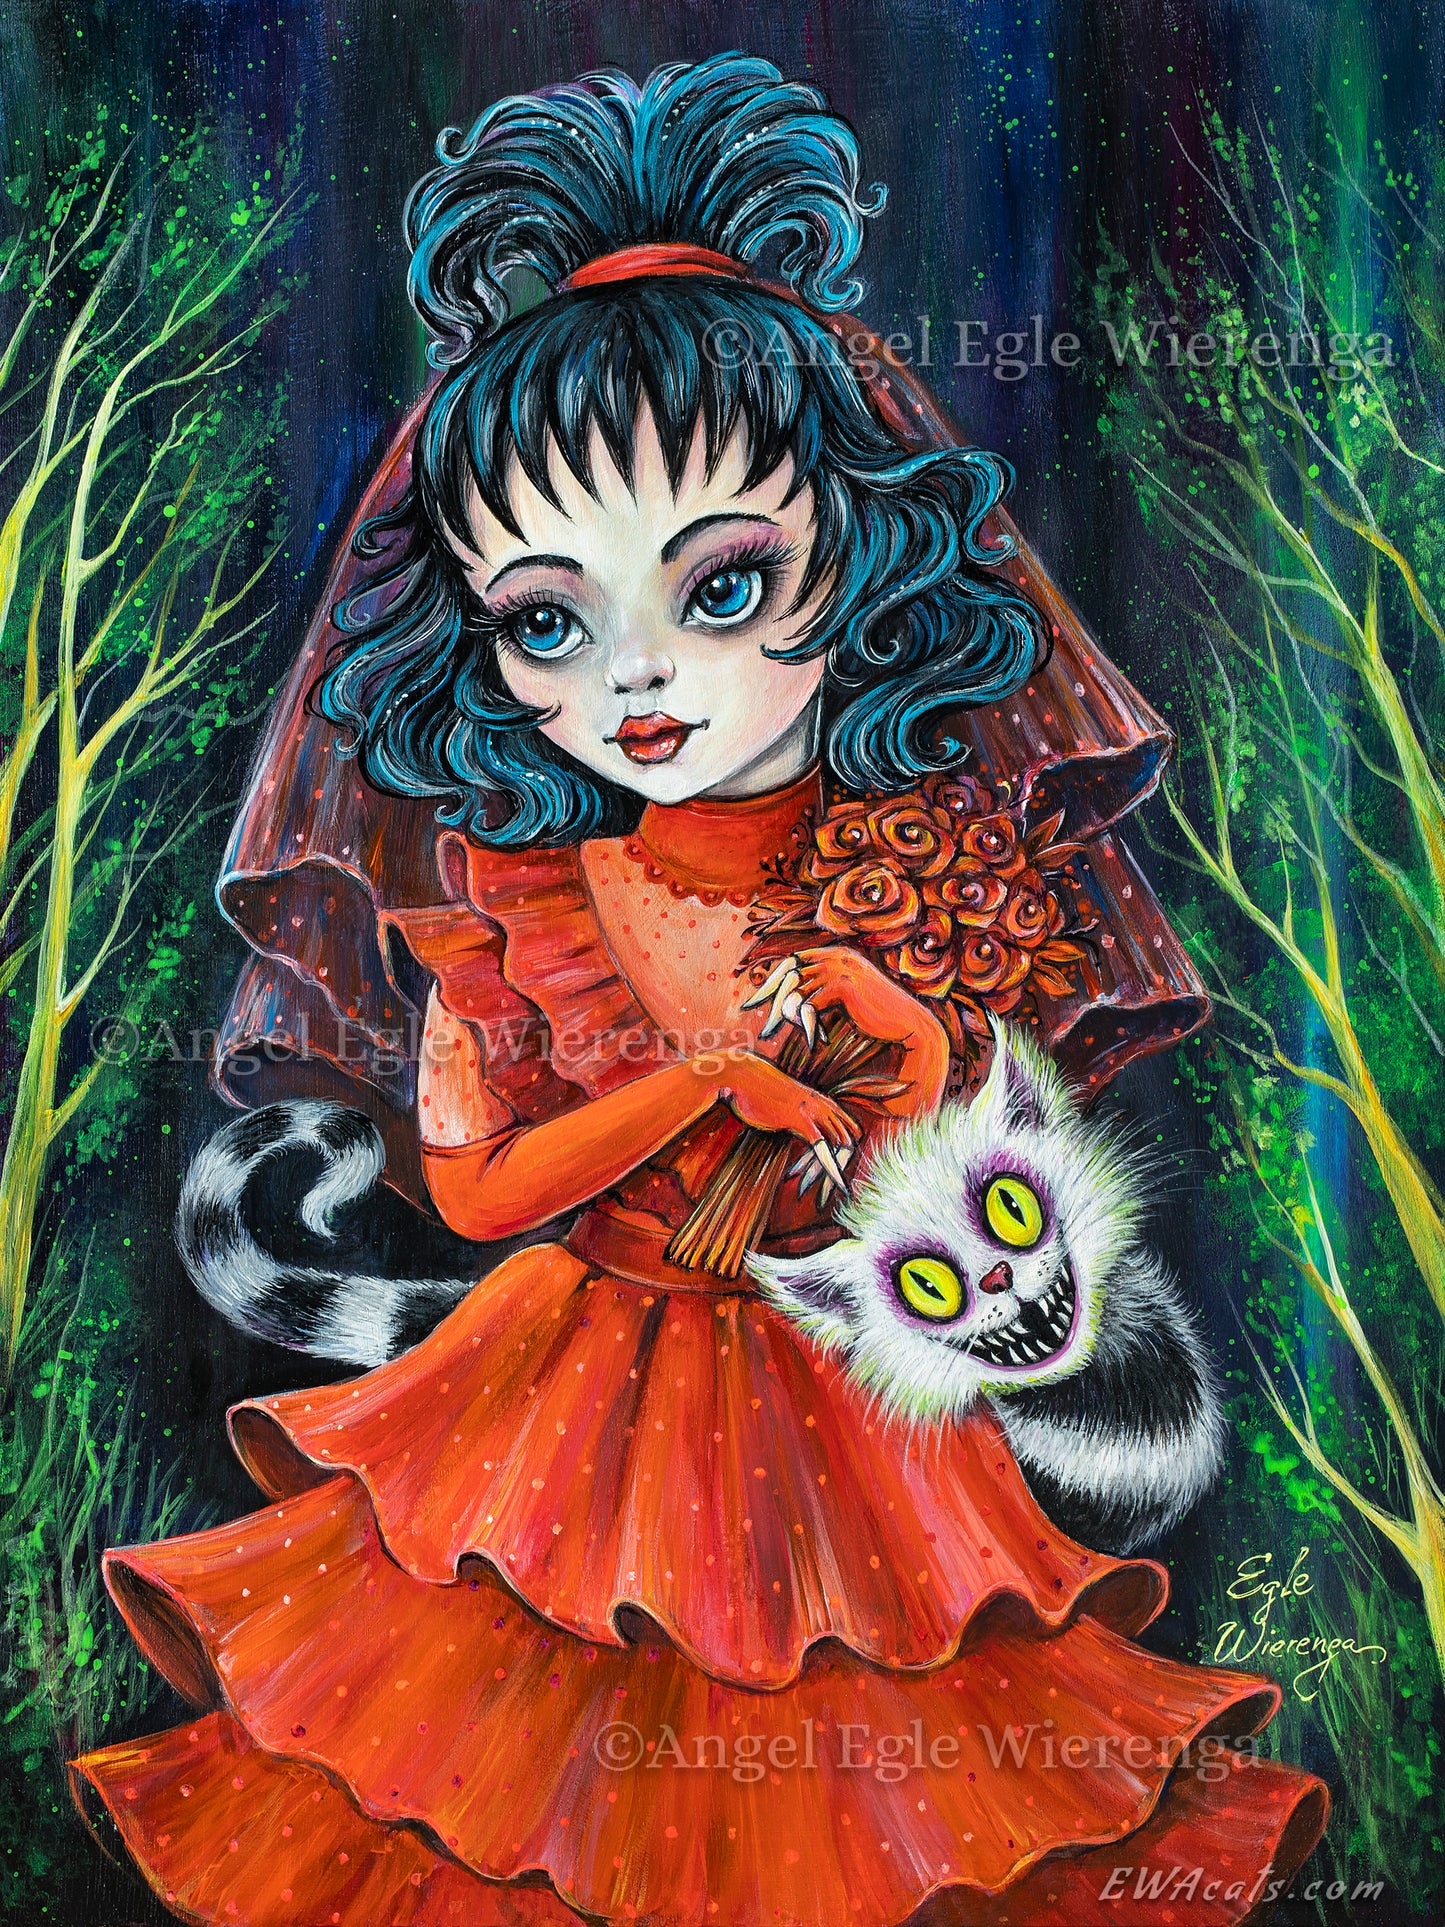 CANVAS "Lydia and Her Beetle Kitty" Open & Limited Edition